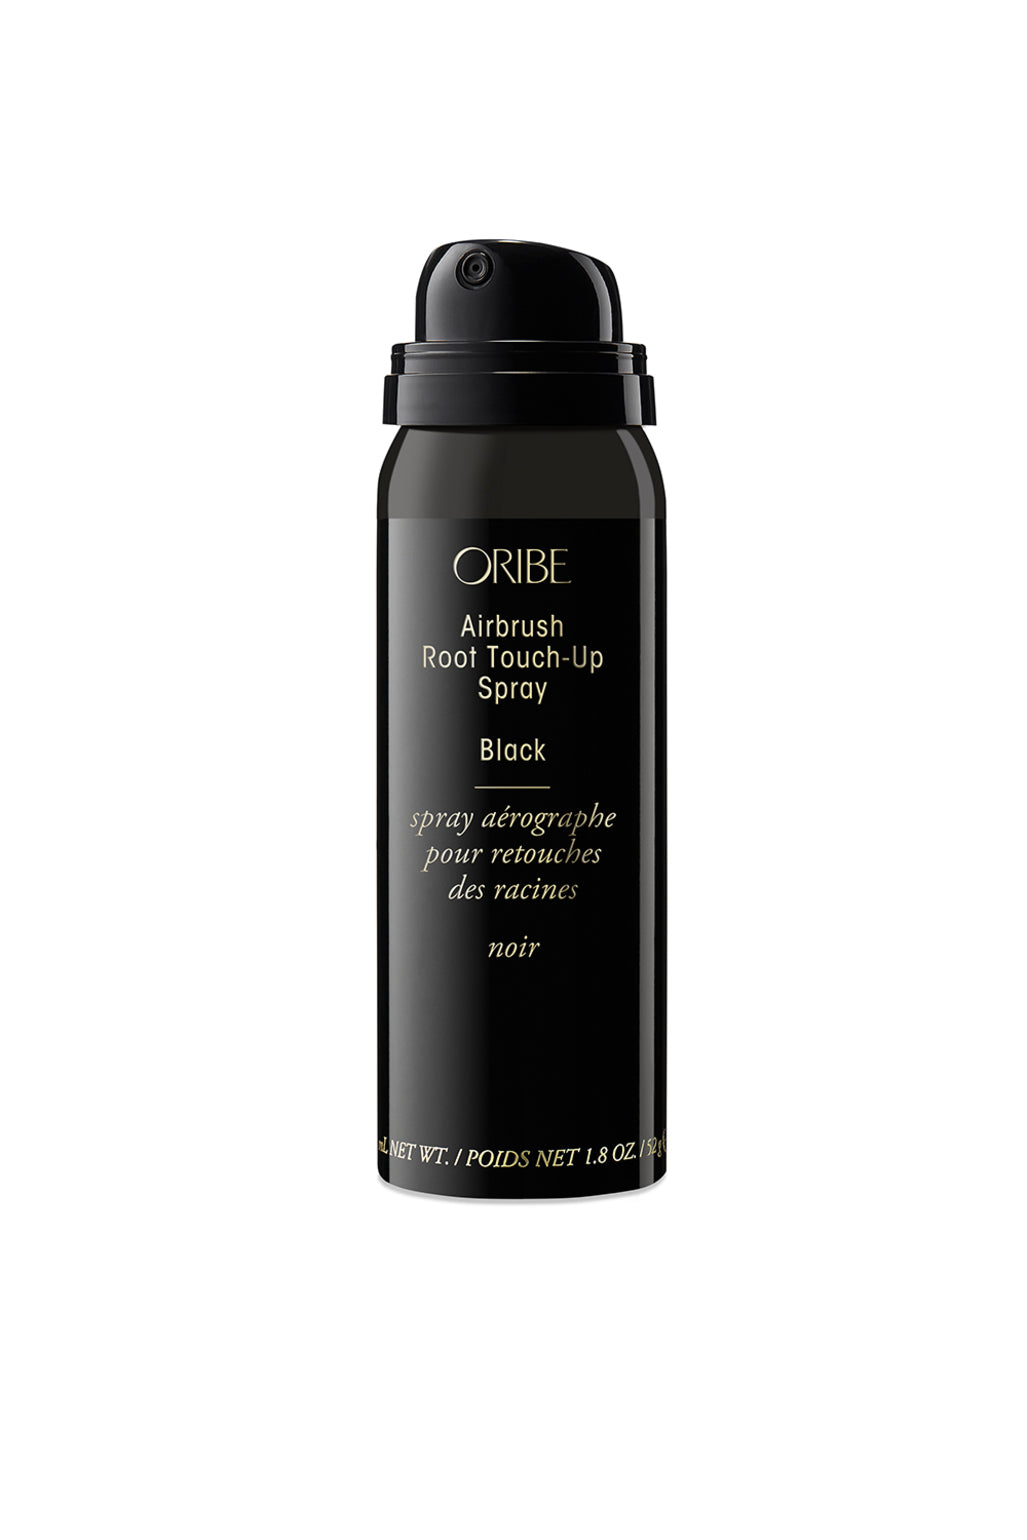 Oribe Black Root Touch-Up Spray